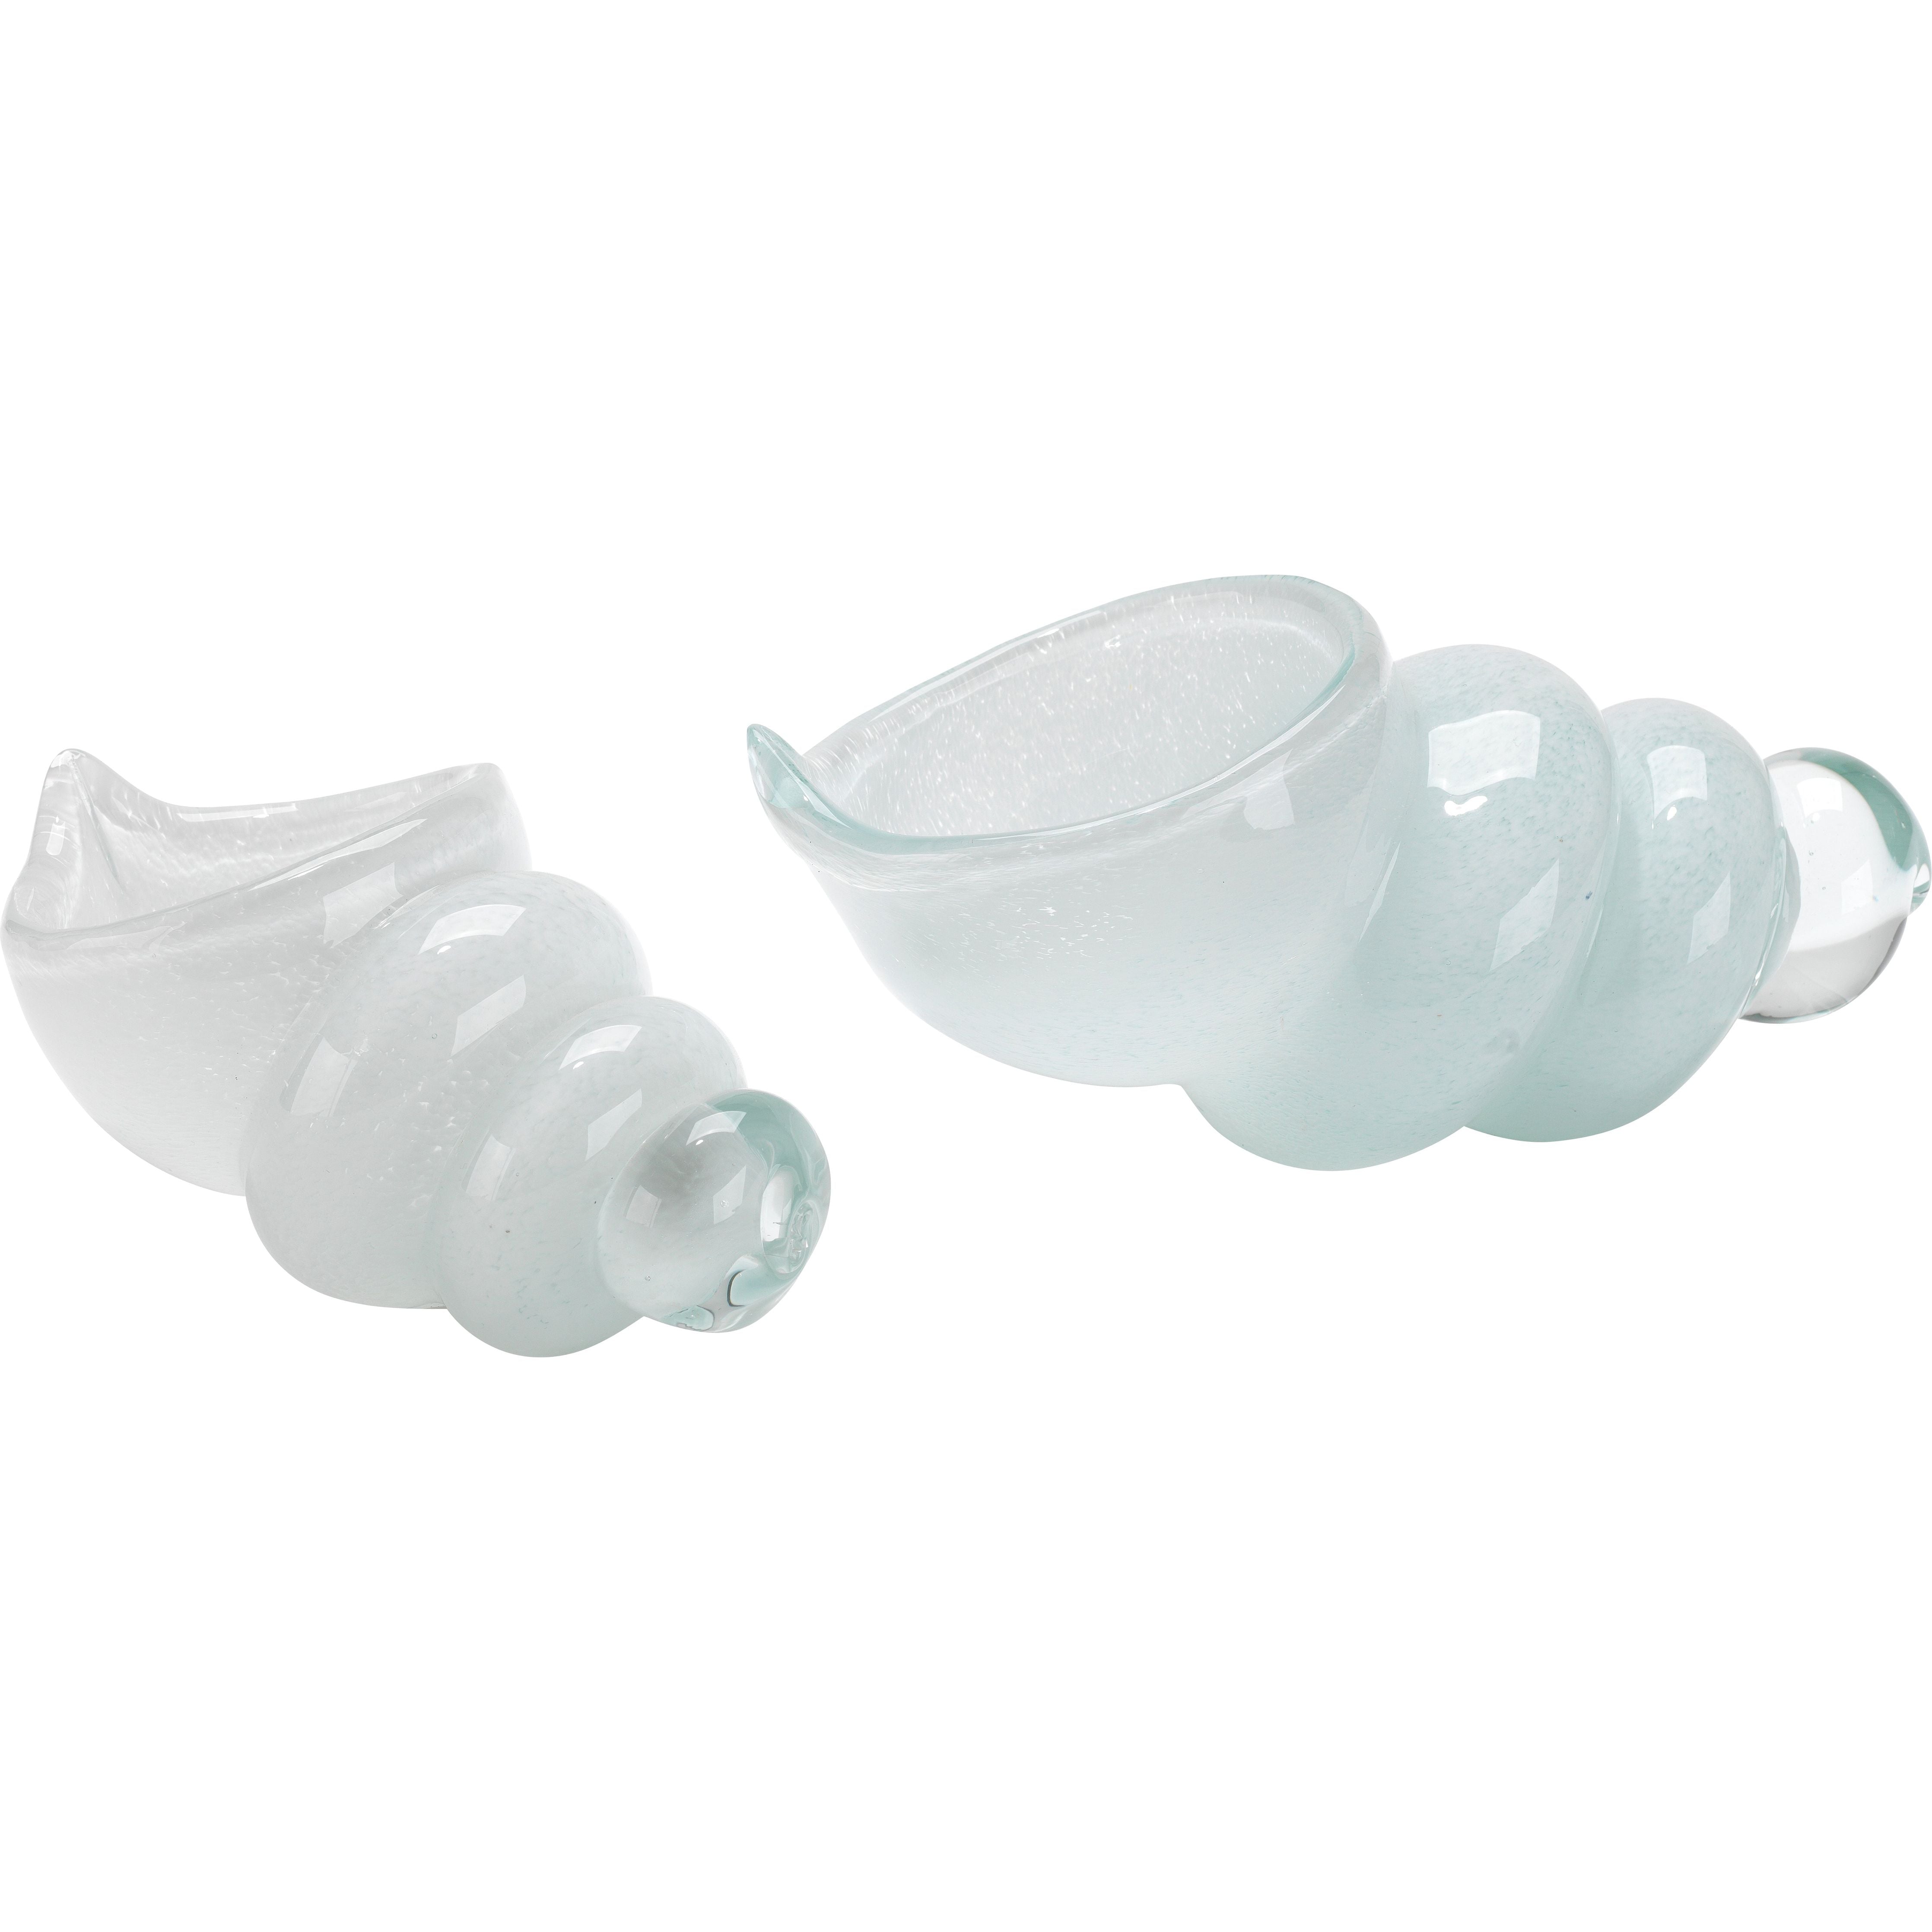 Jamie Young Company - 7ARIE-SHWH - Ariel Shells (Set of 2) - Ariel - White